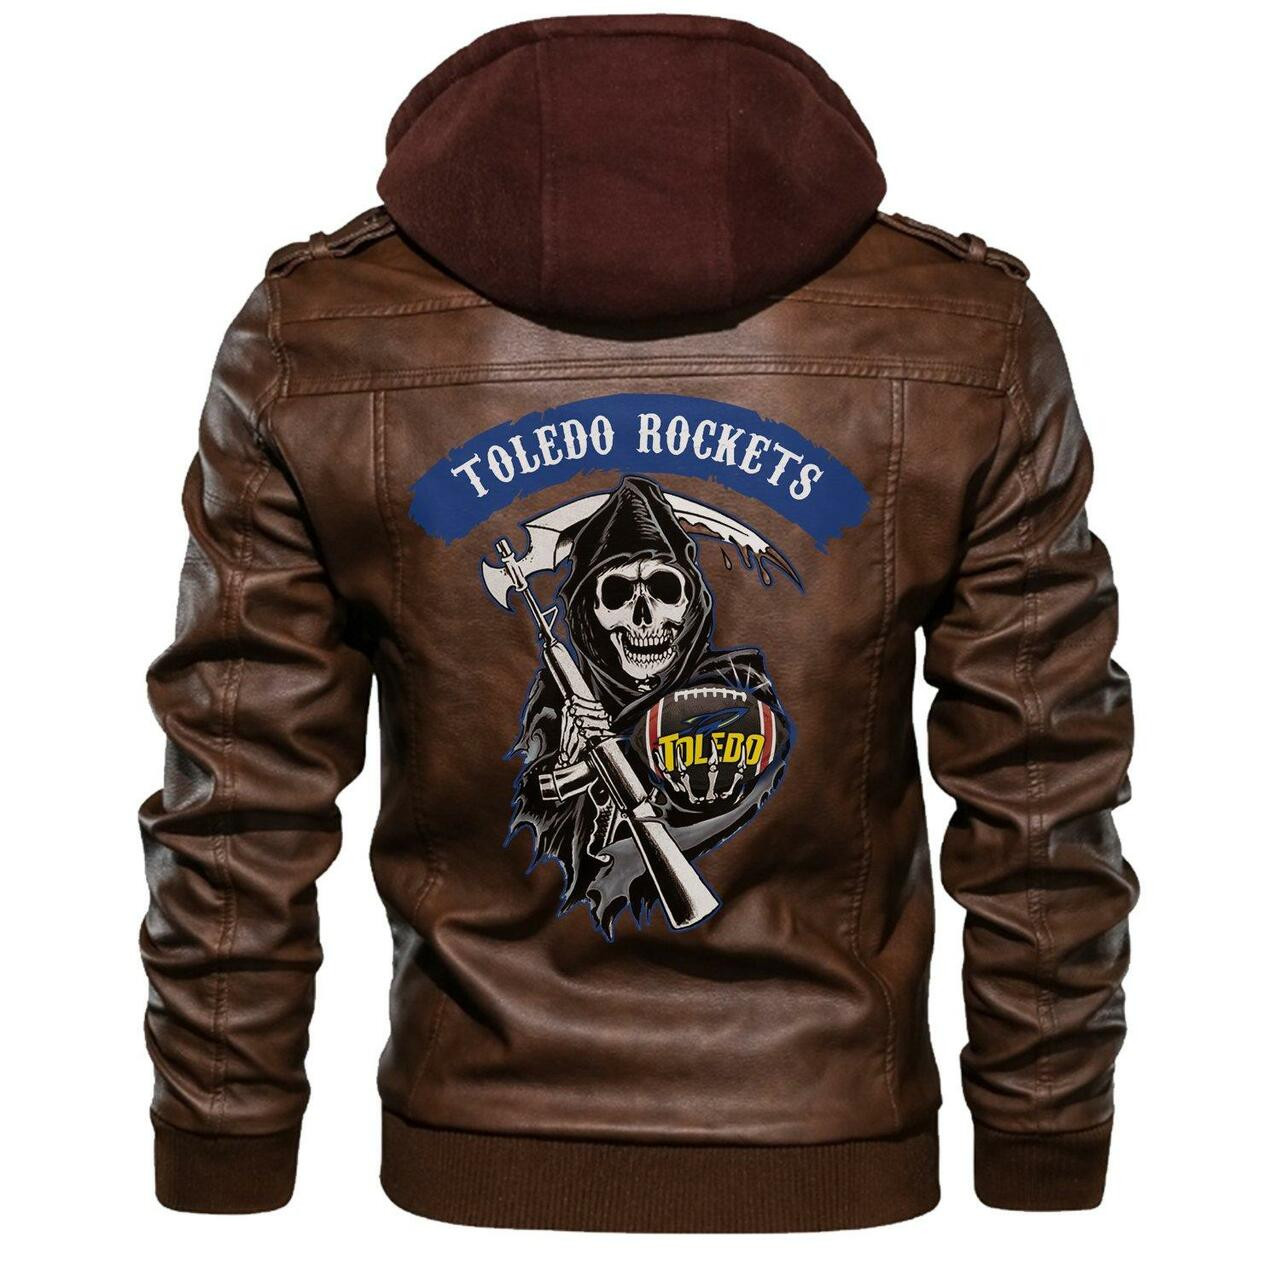 You can find a good leather jacket by access our website 67